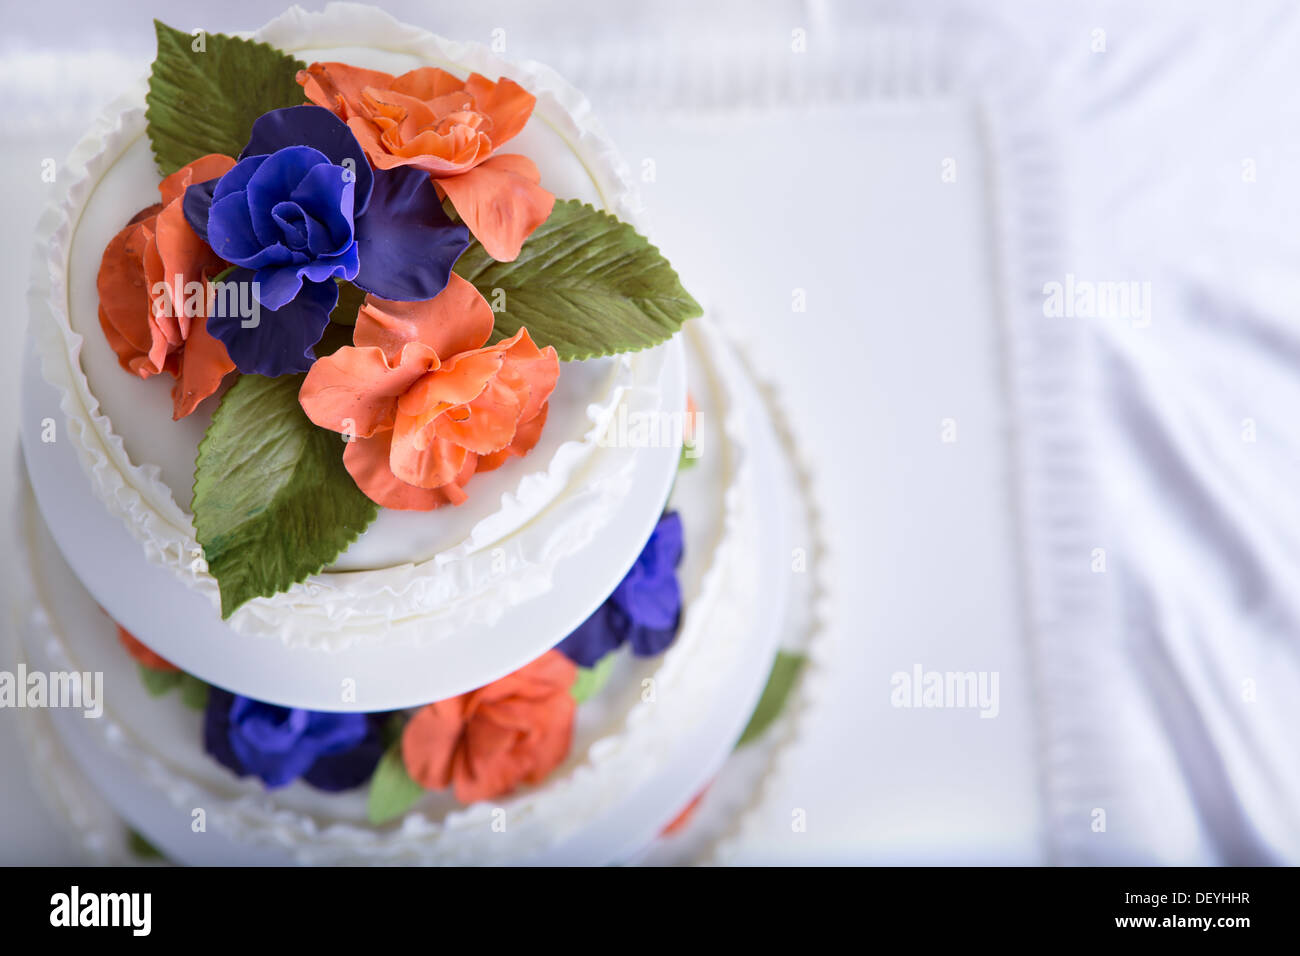 Three tier fondant ruffled white wedding cake decorated with orange and purple gum paste roses and green leafs, shot from above Stock Photo